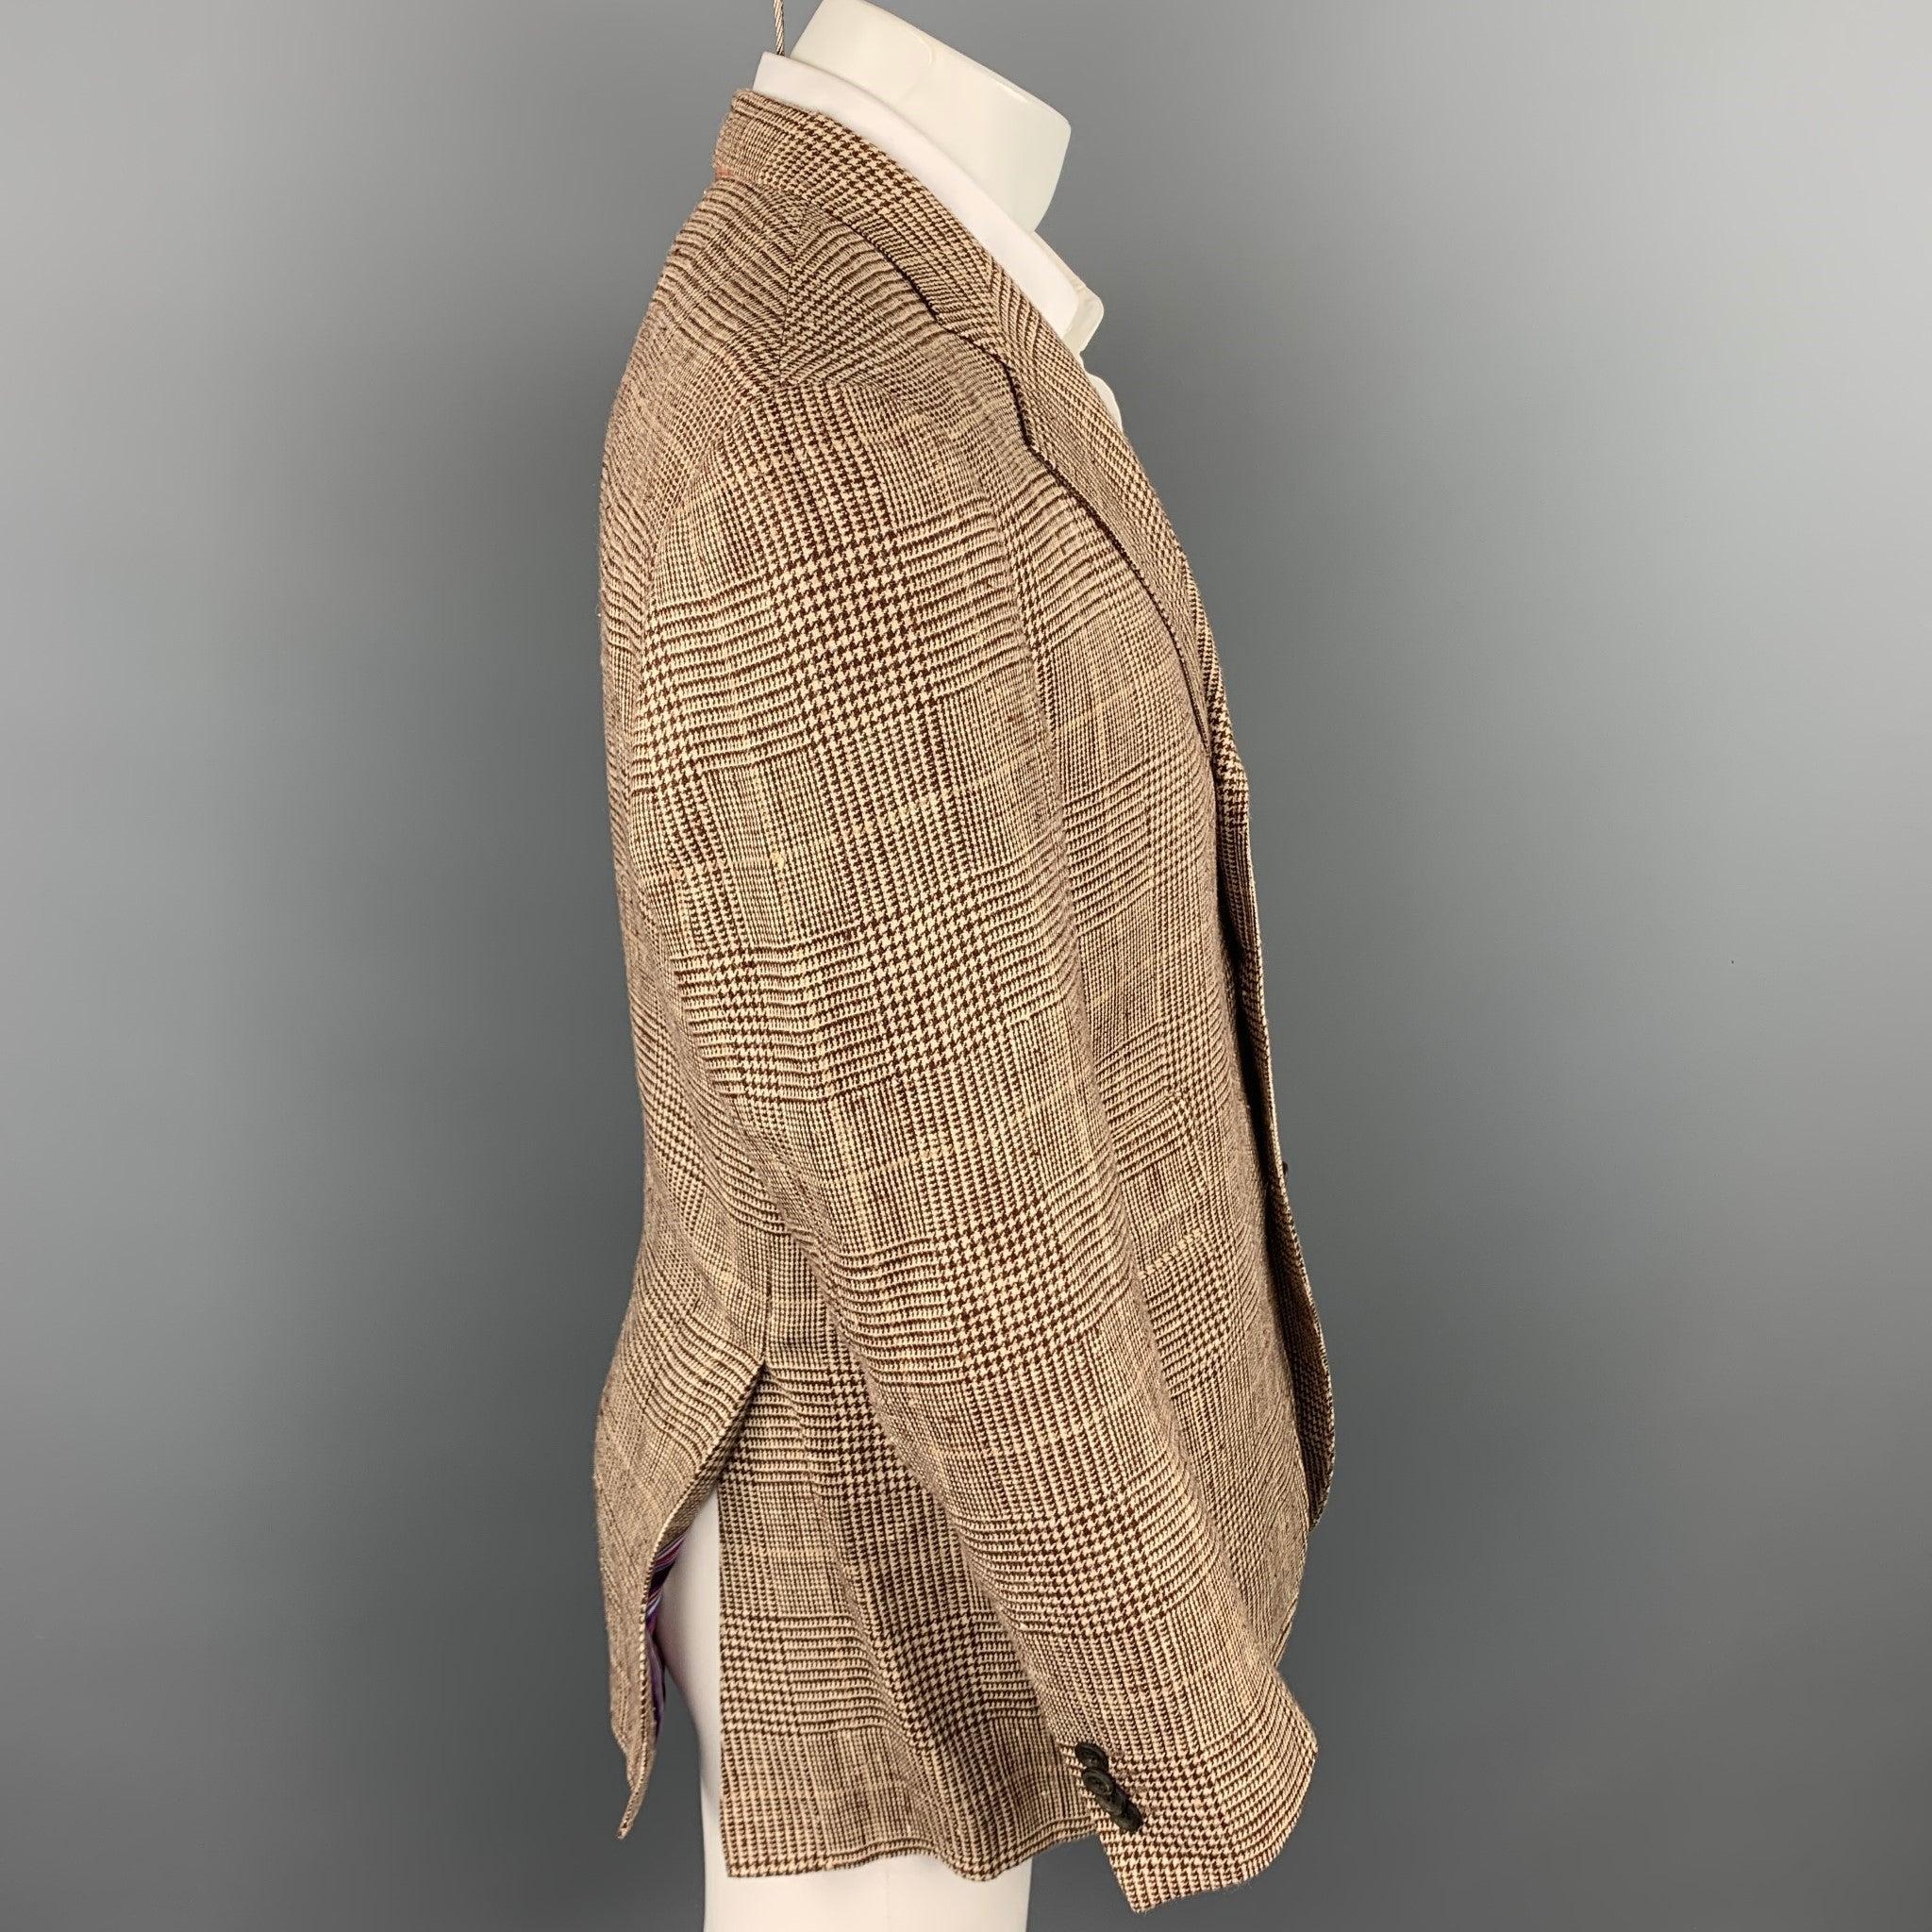 ETRO Size 40 Brown & Beige Plaid Silk / Linen Notch Lapel Sport Coat In Good Condition For Sale In San Francisco, CA